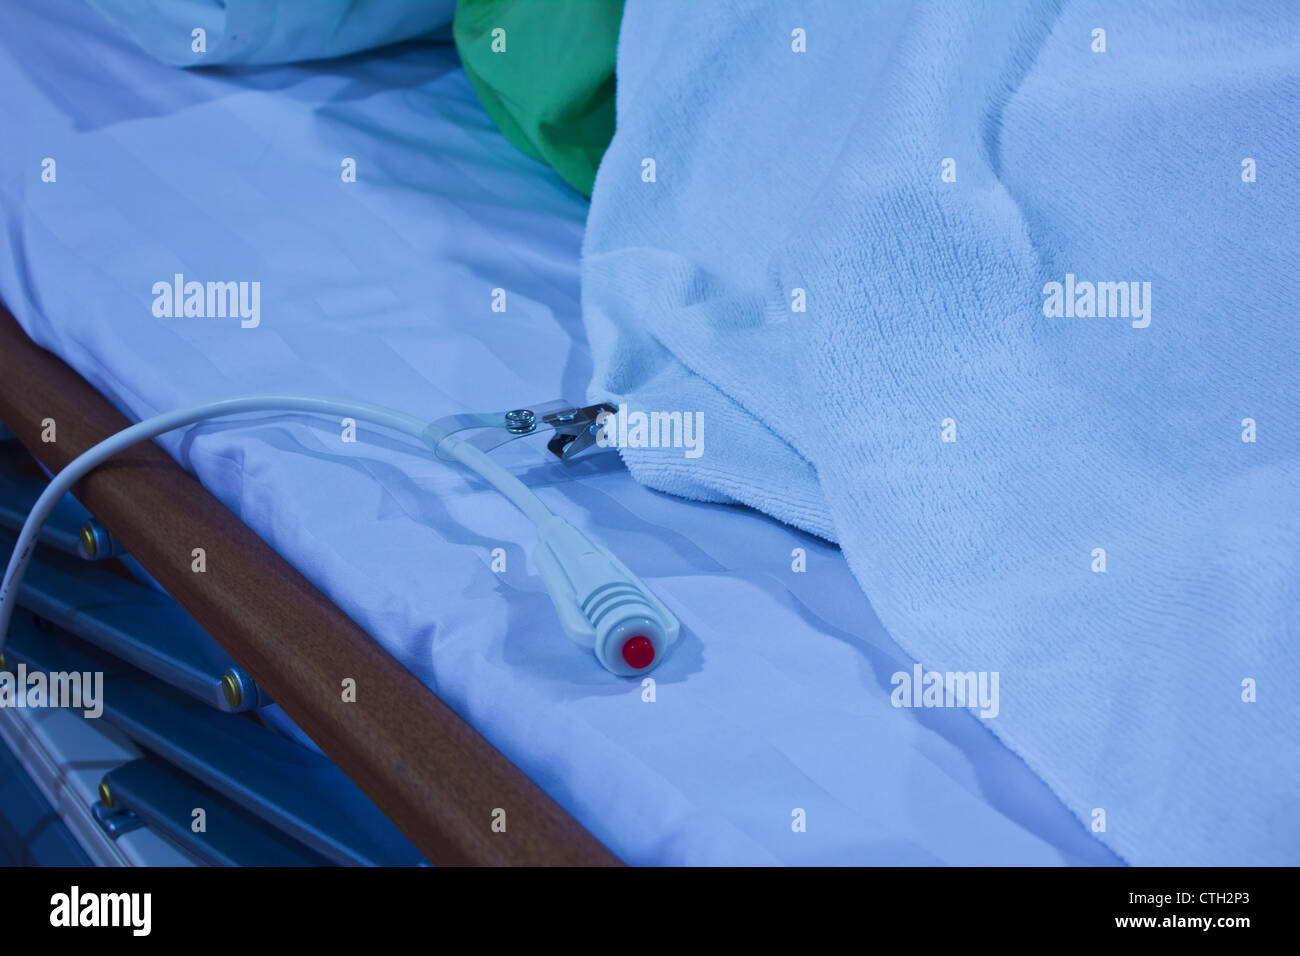 Stock Photo - An emergency call pull switch in a hospital room. Stock Photo